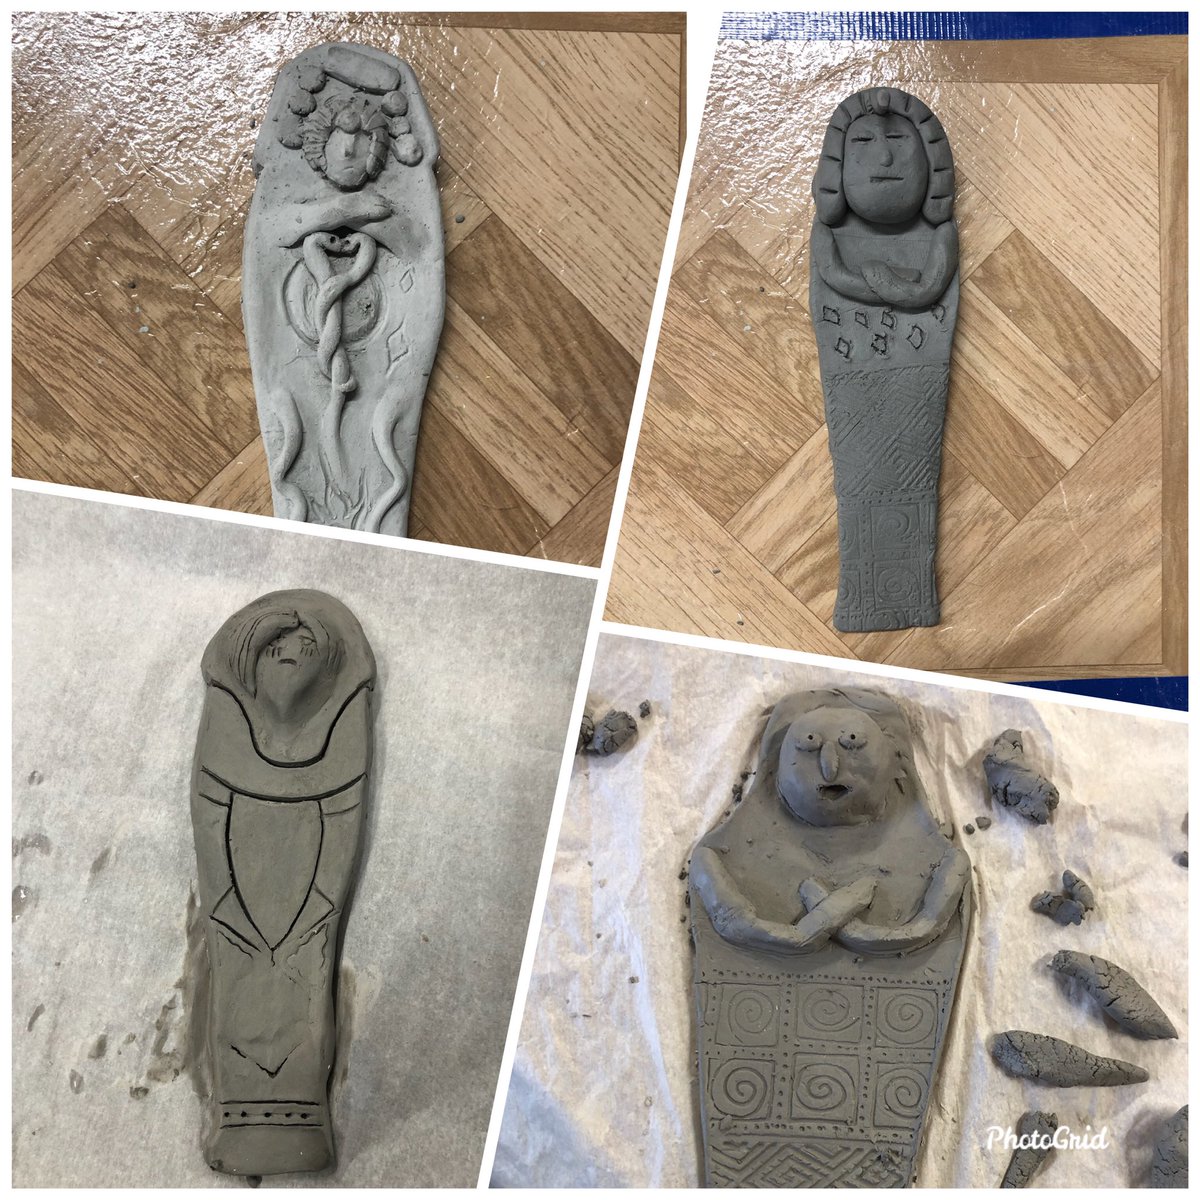 6th grade at @YorbitaCheetah learned a lot about traditions as they studied about Ancient Egypt. Their final project is based on one of those traditions designing a sarcophagus (coffin) to prepare for the afterlife. They are doing it out of clay. @RowlandSchools #WeAreRUSD